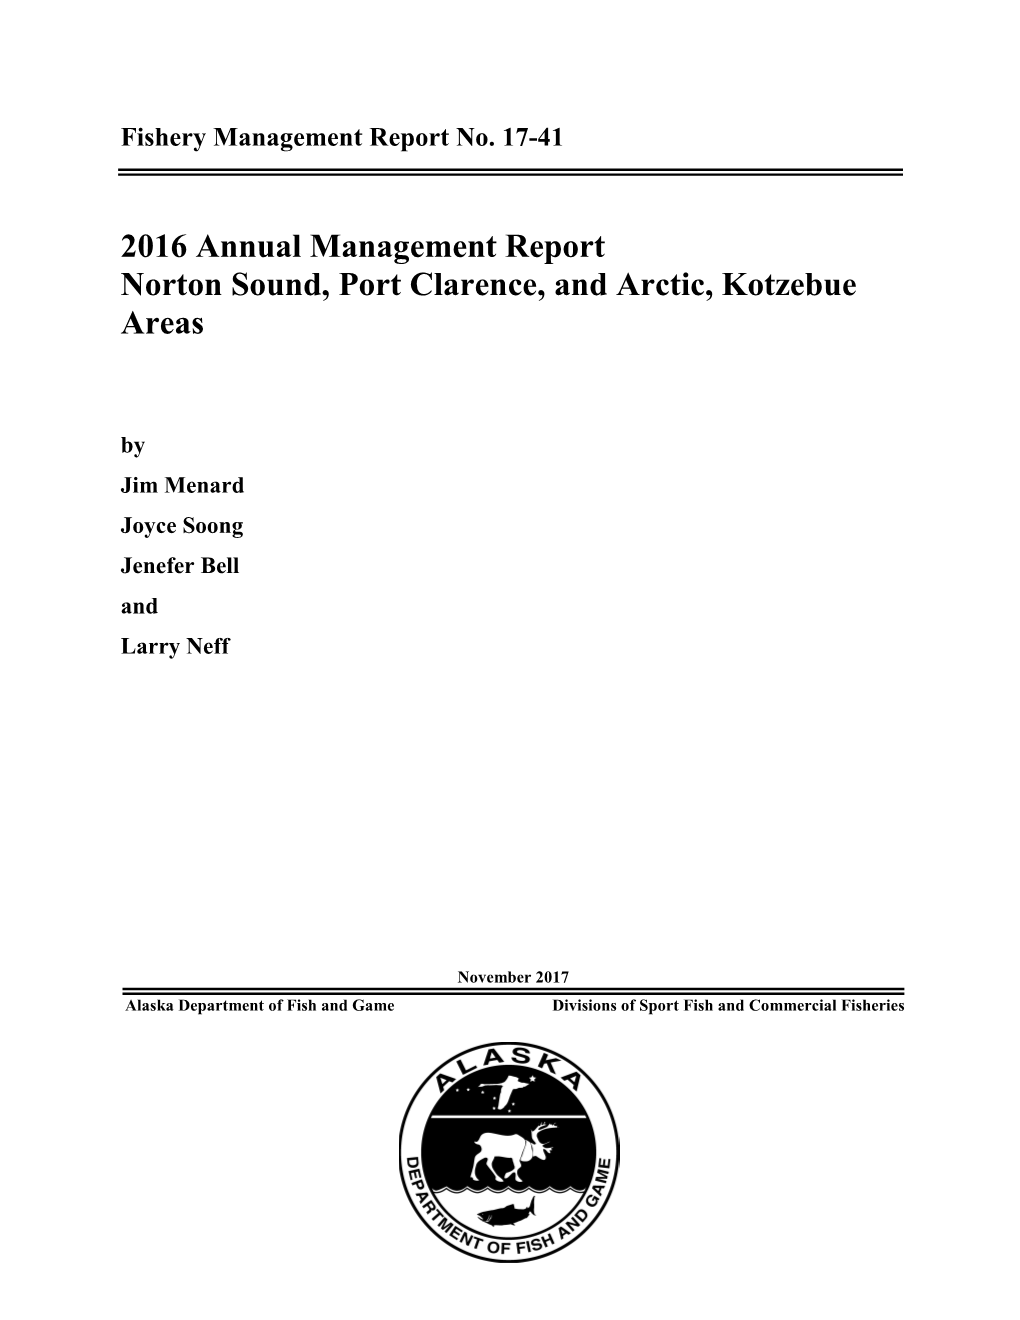 2016 Annual Management Report Norton Sound, Port Clarence, and Arctic, Kotzebue Areas